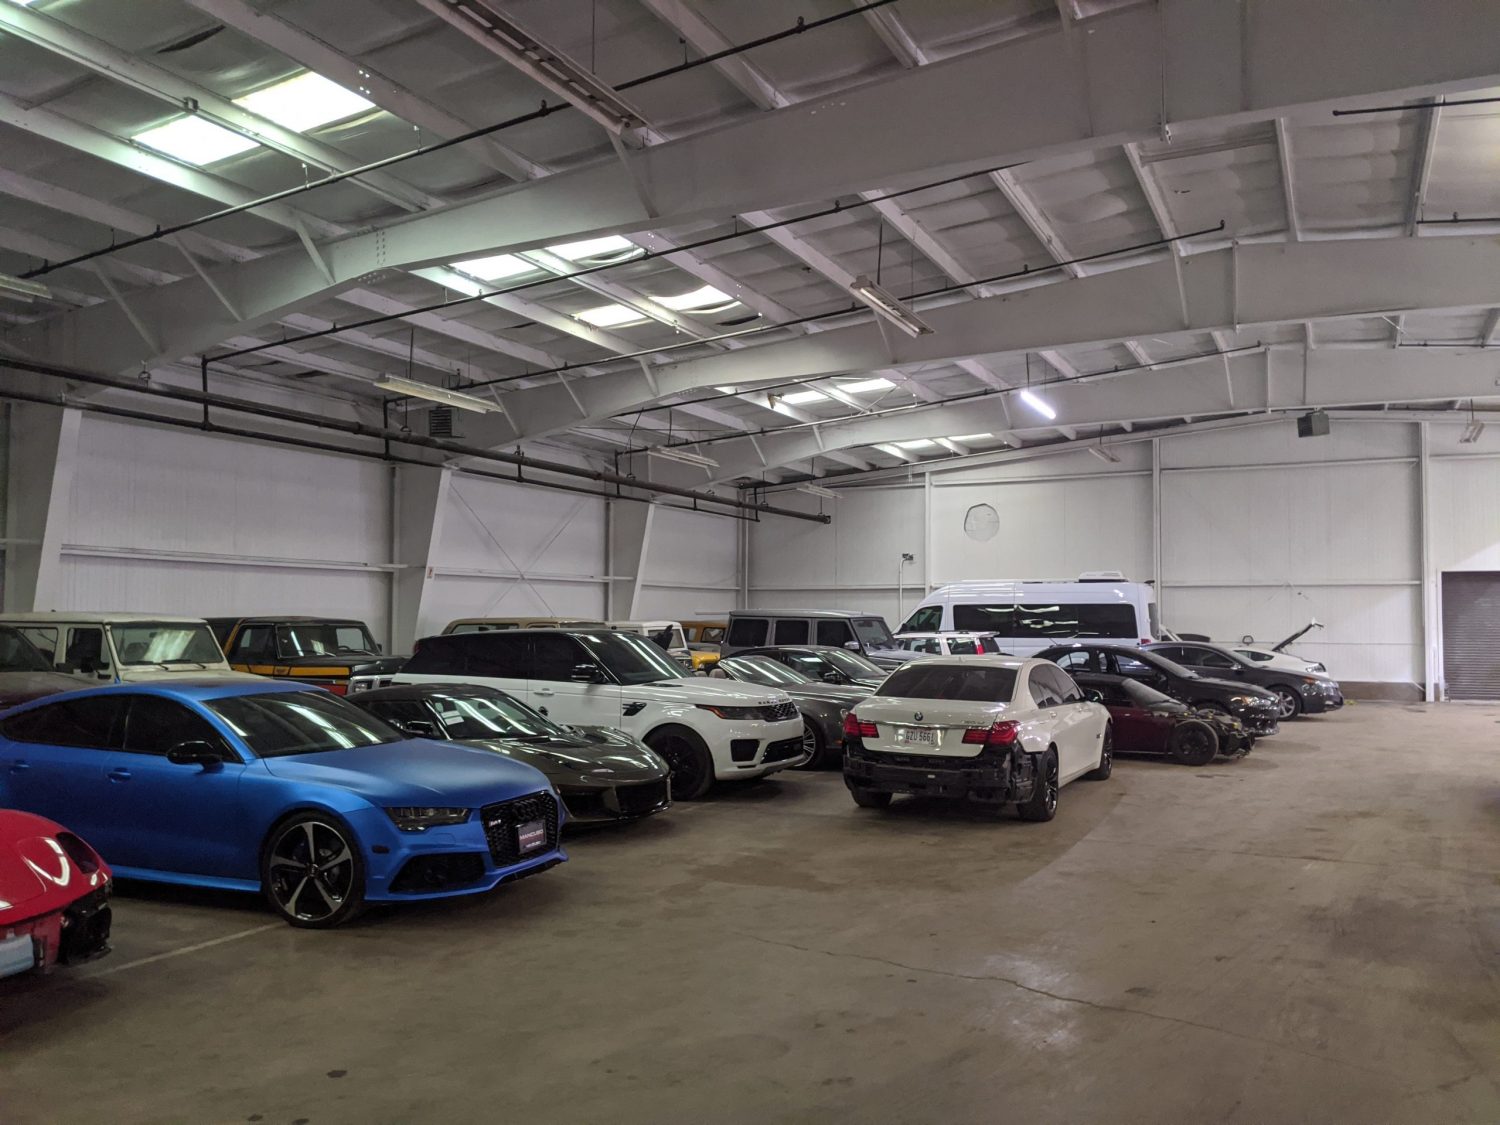 The Car Warehouse - A different kind of company, a different kind of  car<br/><br/>